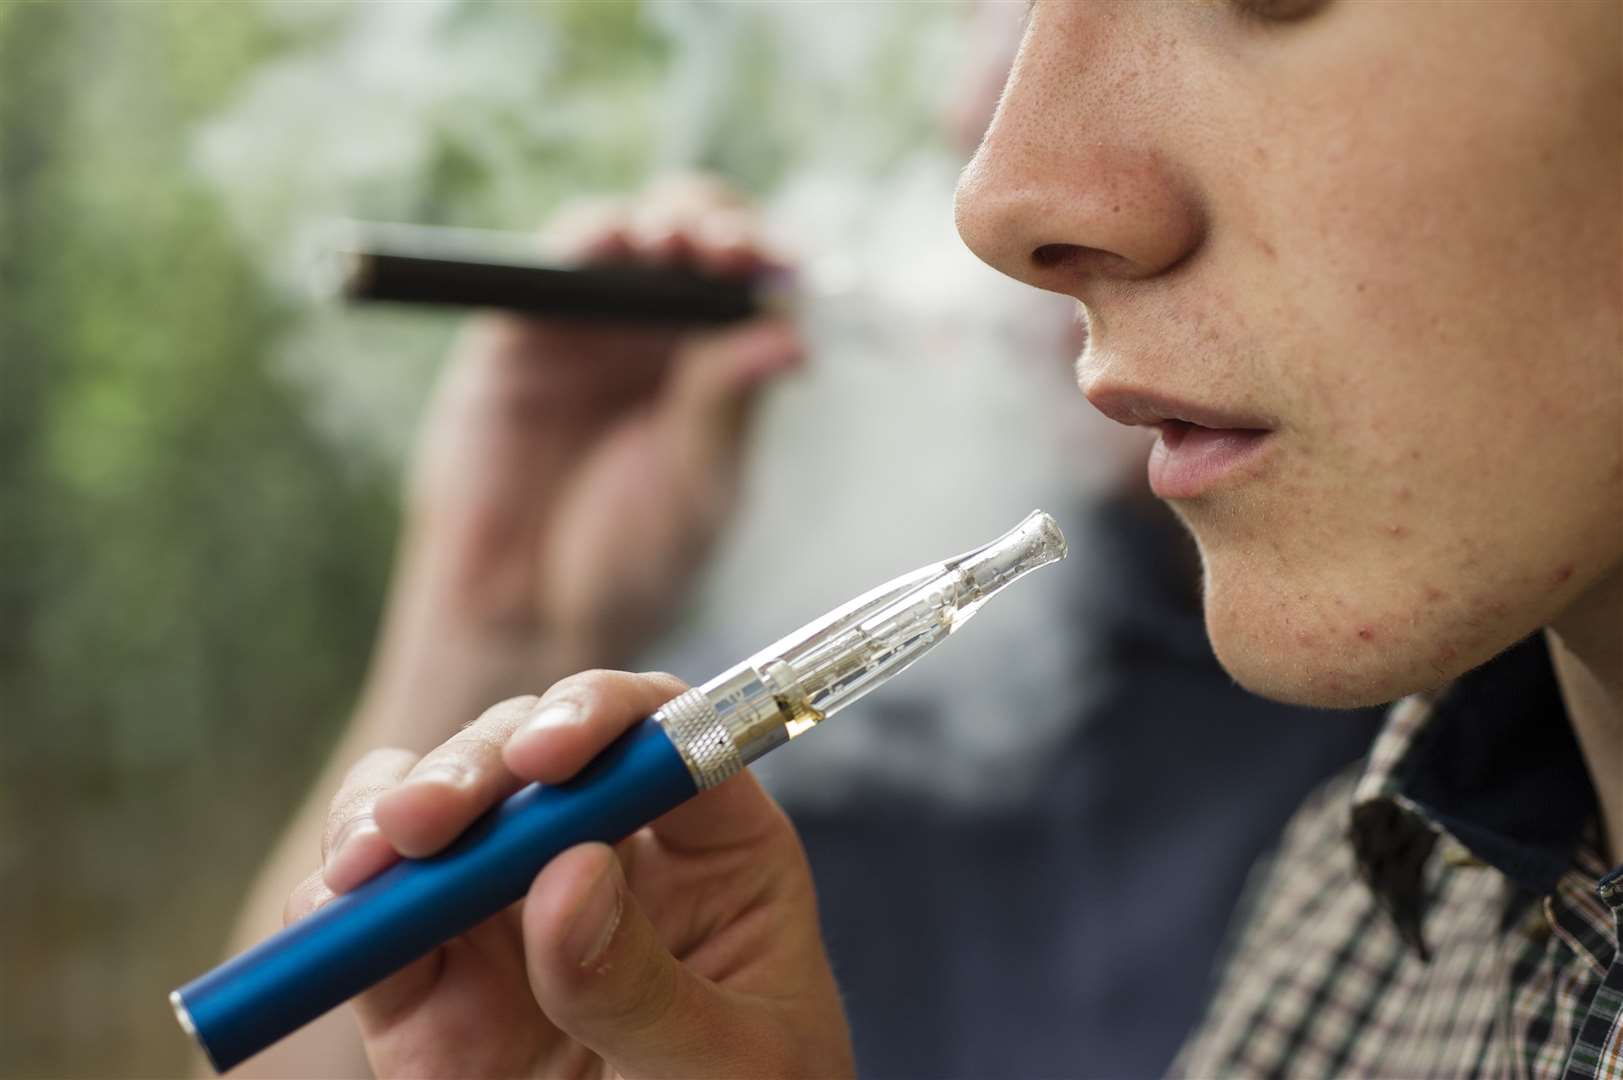 Vaping has become fashionable, especially among the young